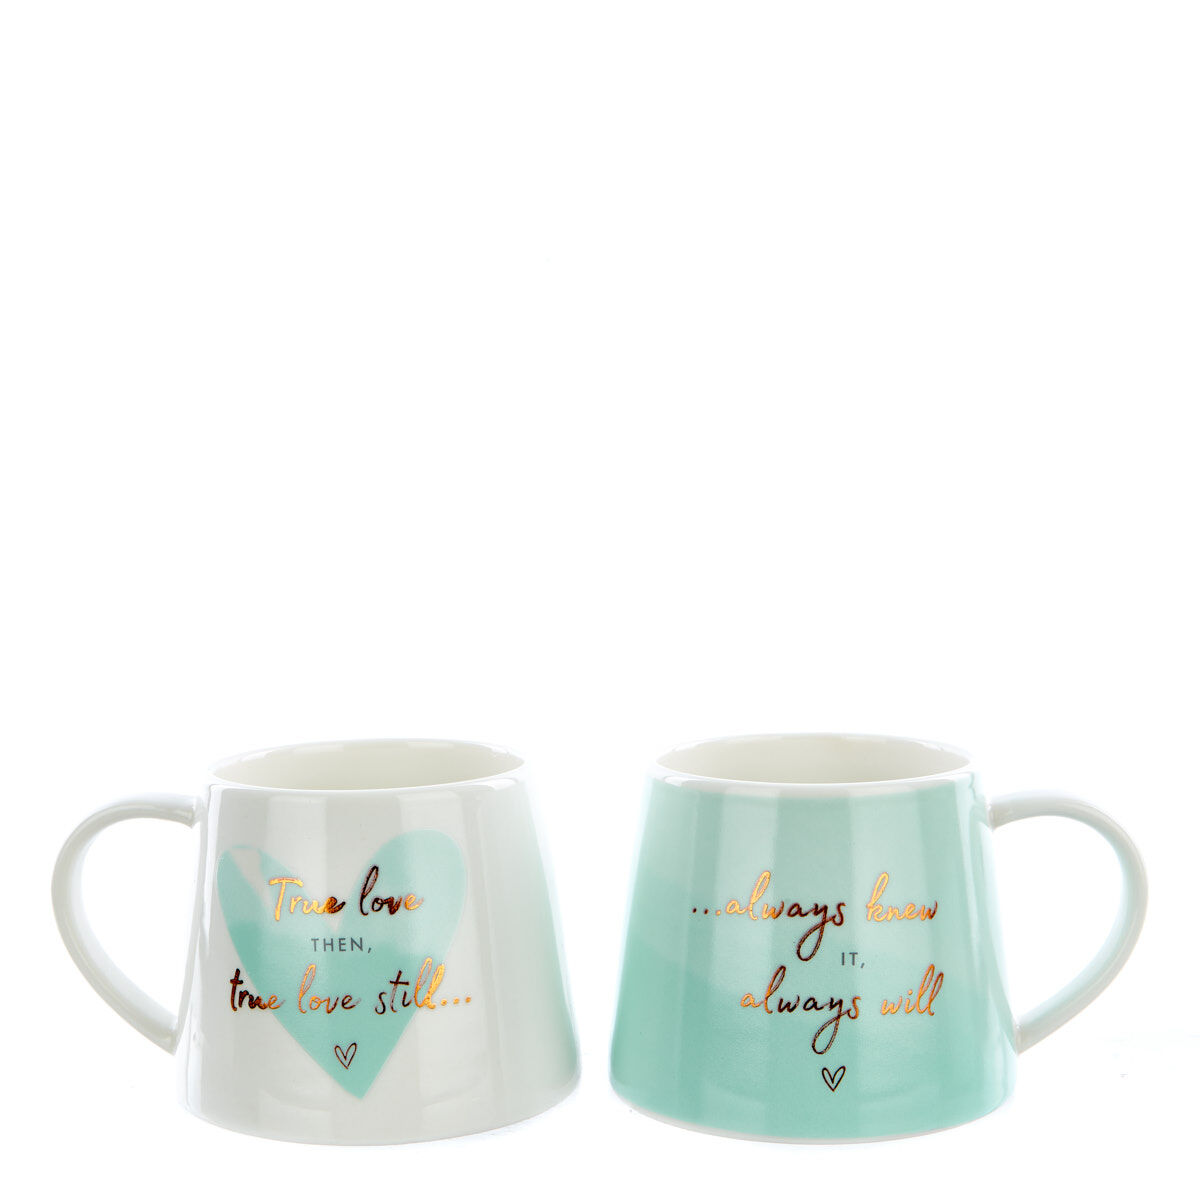 HUBBY WIFEY HIS n HERS MUG SET GREAT GIFT ADD A NAME FOR FREE 